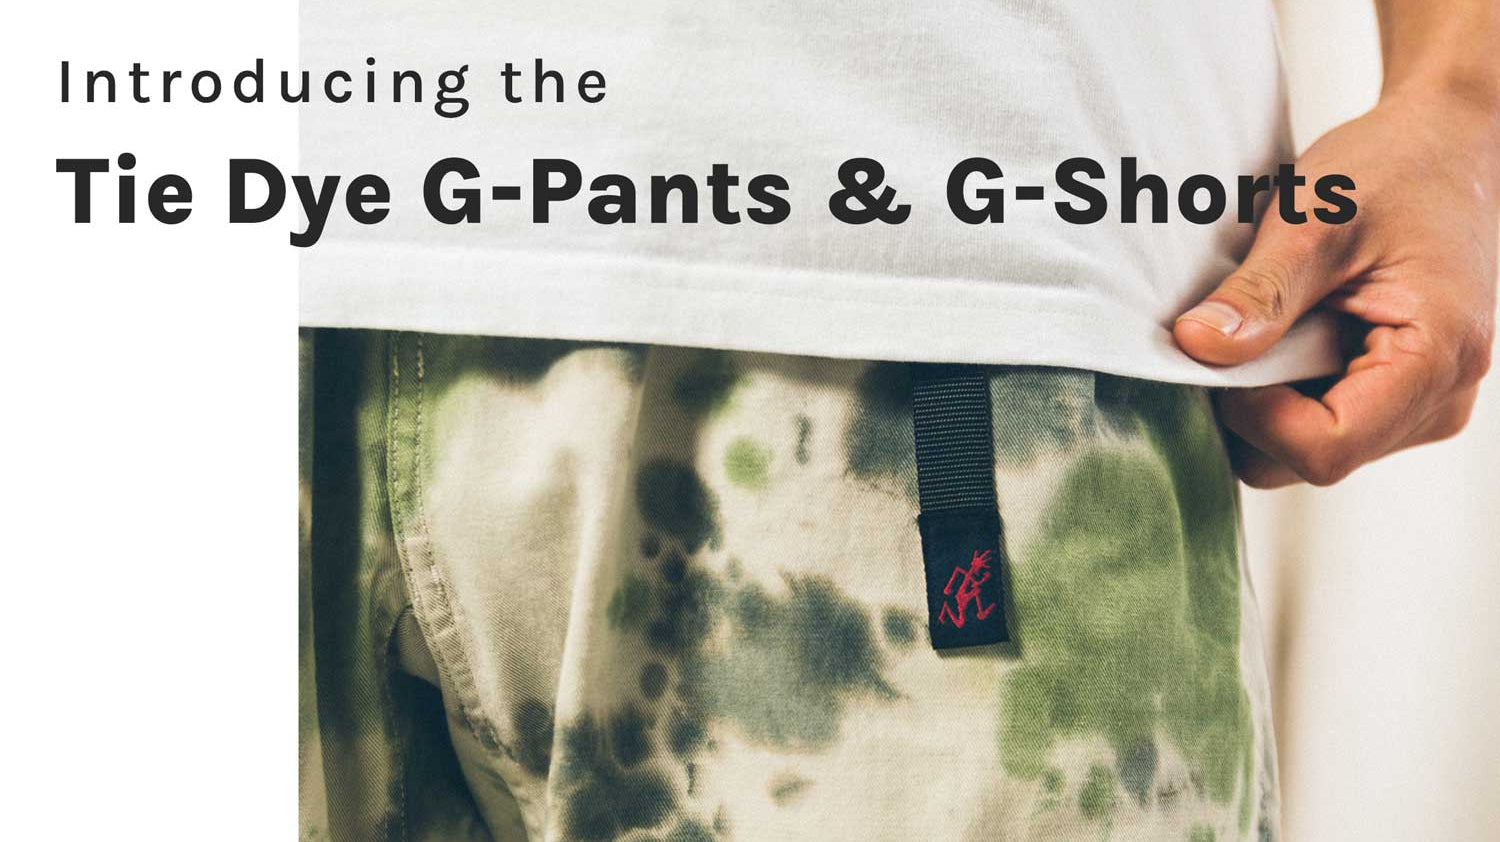 Introducing—the Tie Dye G-Pants and G-Shorts